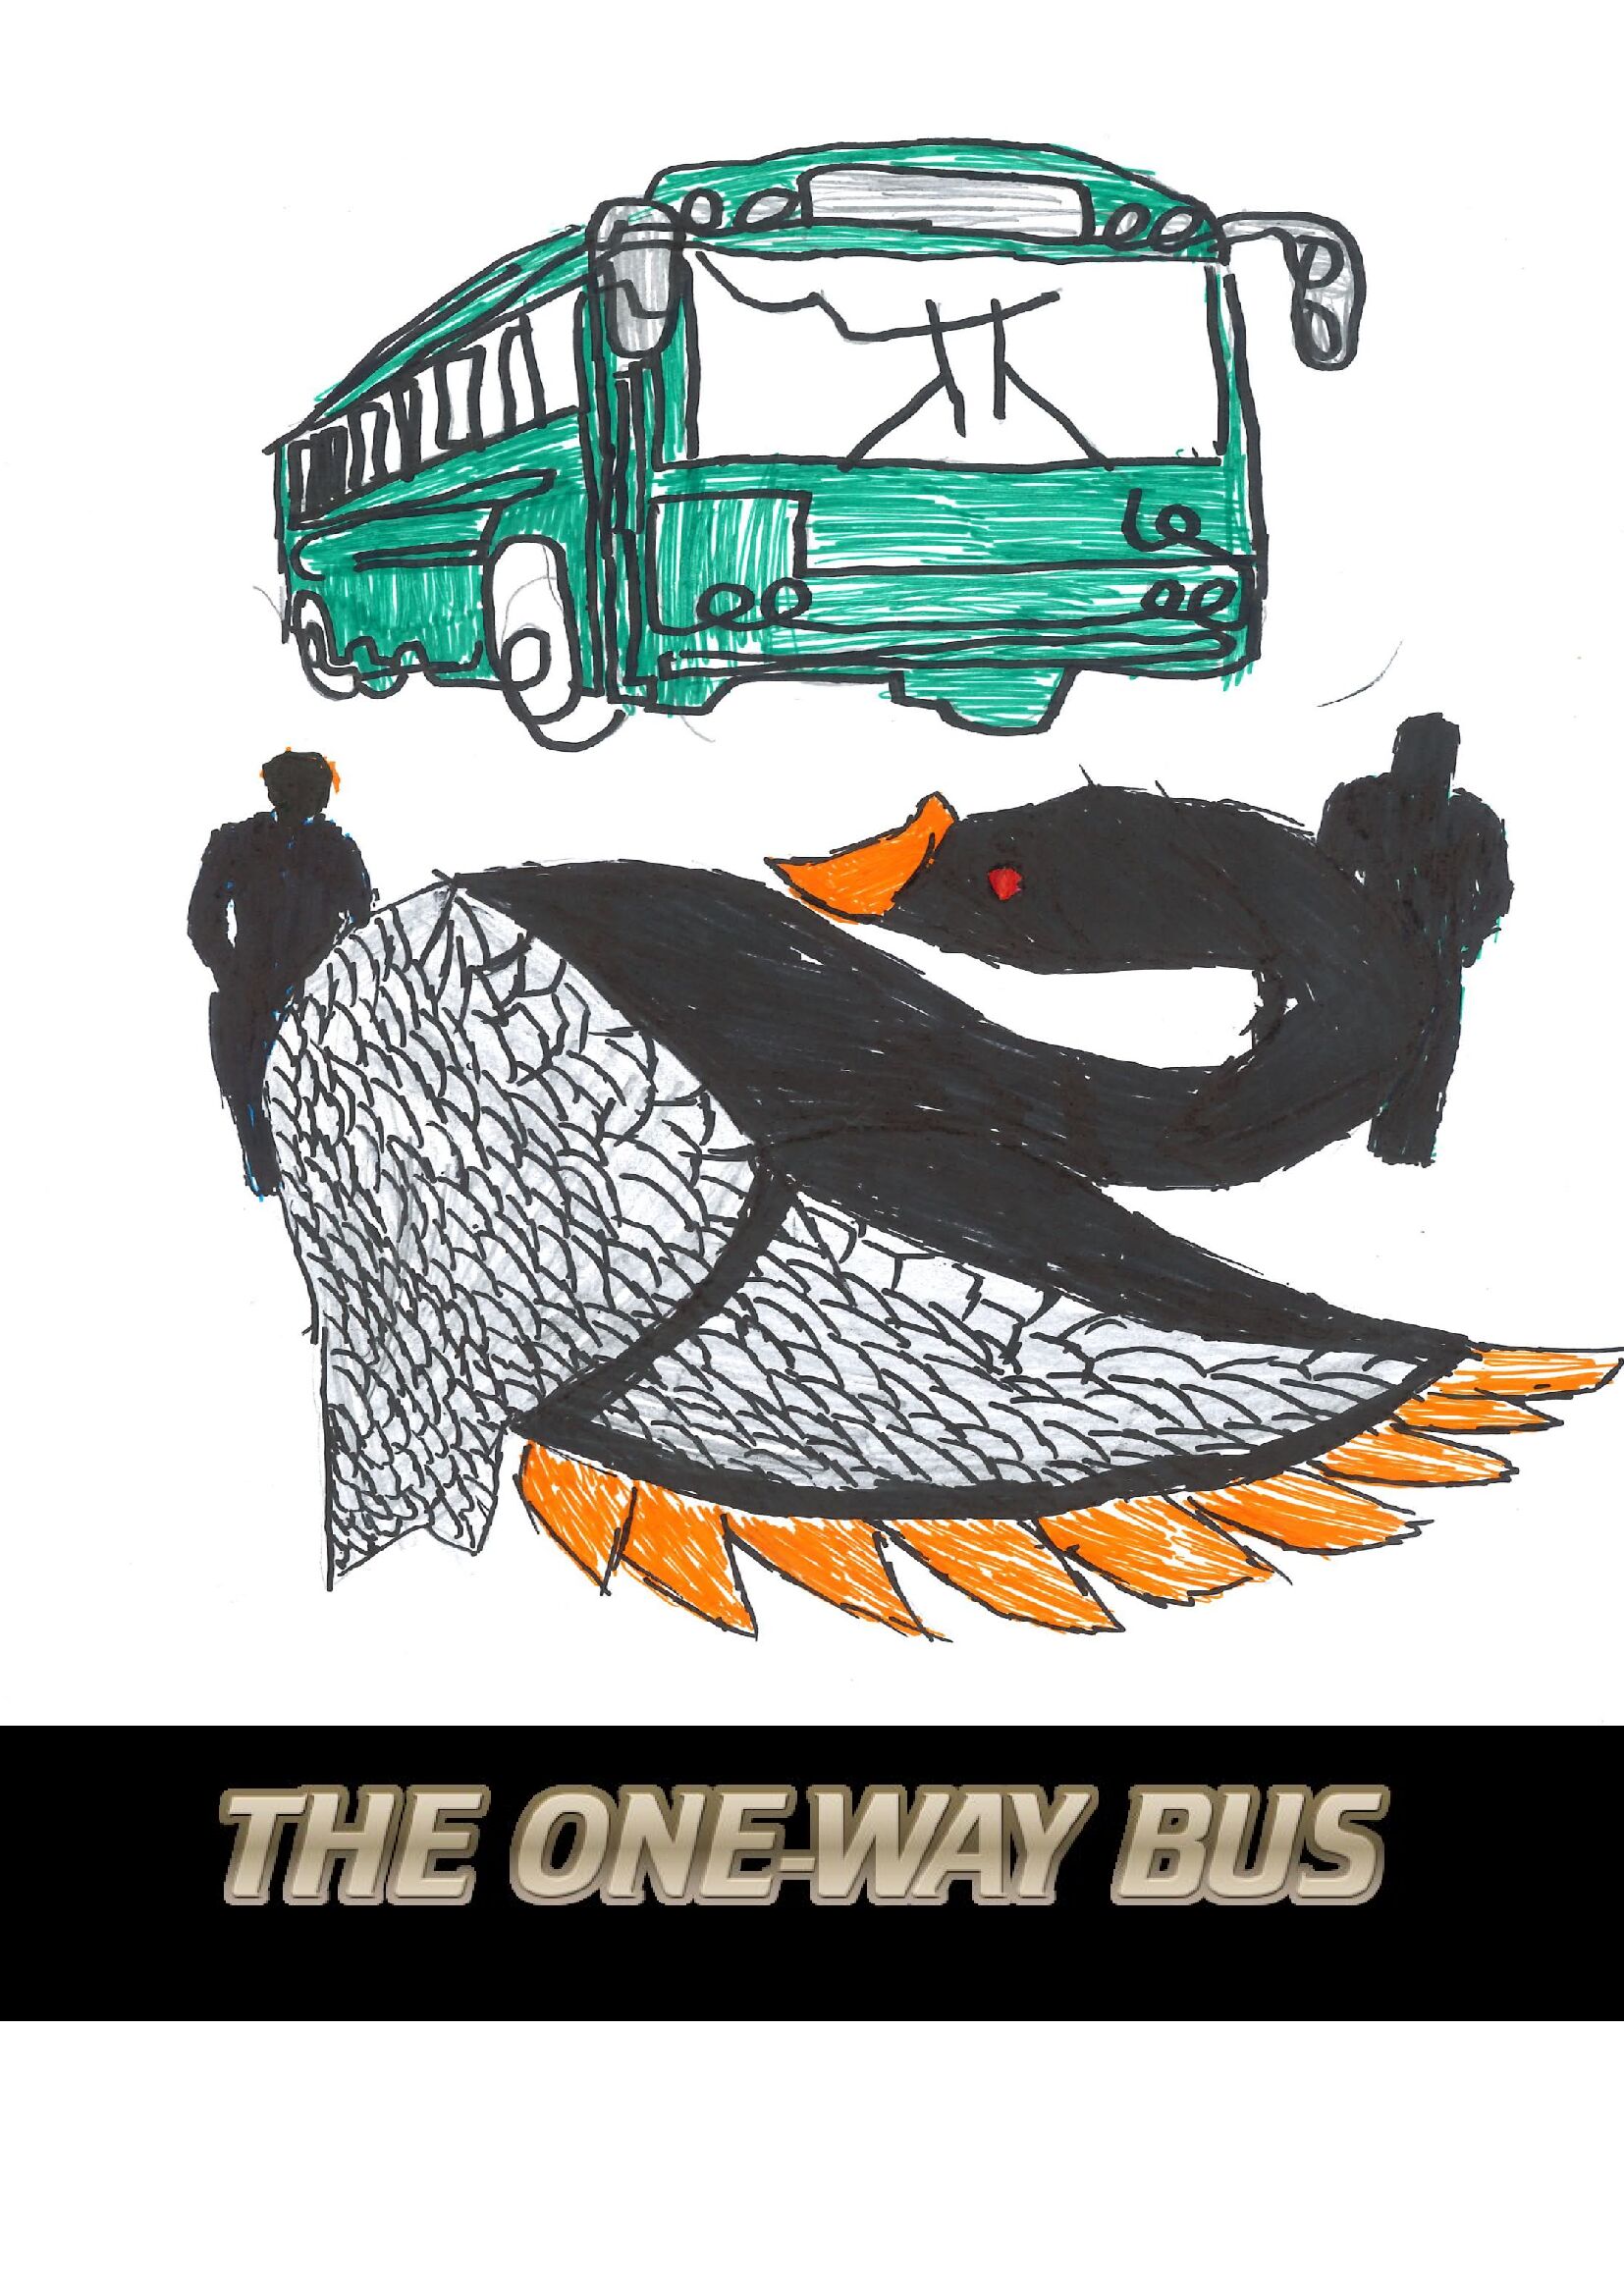 The One Way Bus